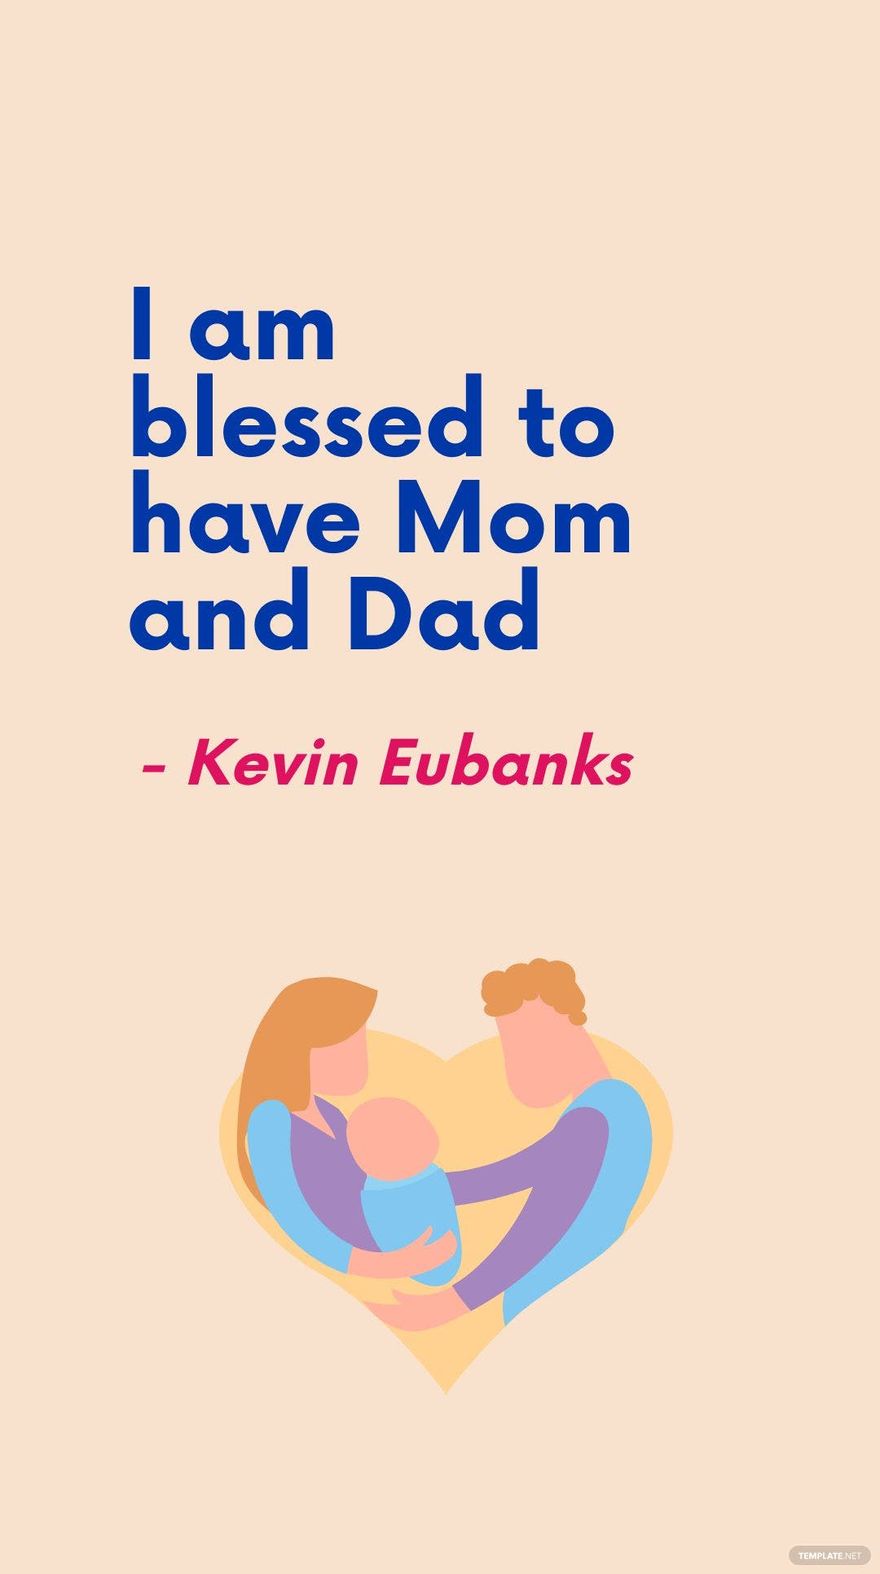 Free Kevin Eubanks - I am blessed to have Mom and Dad in JPG